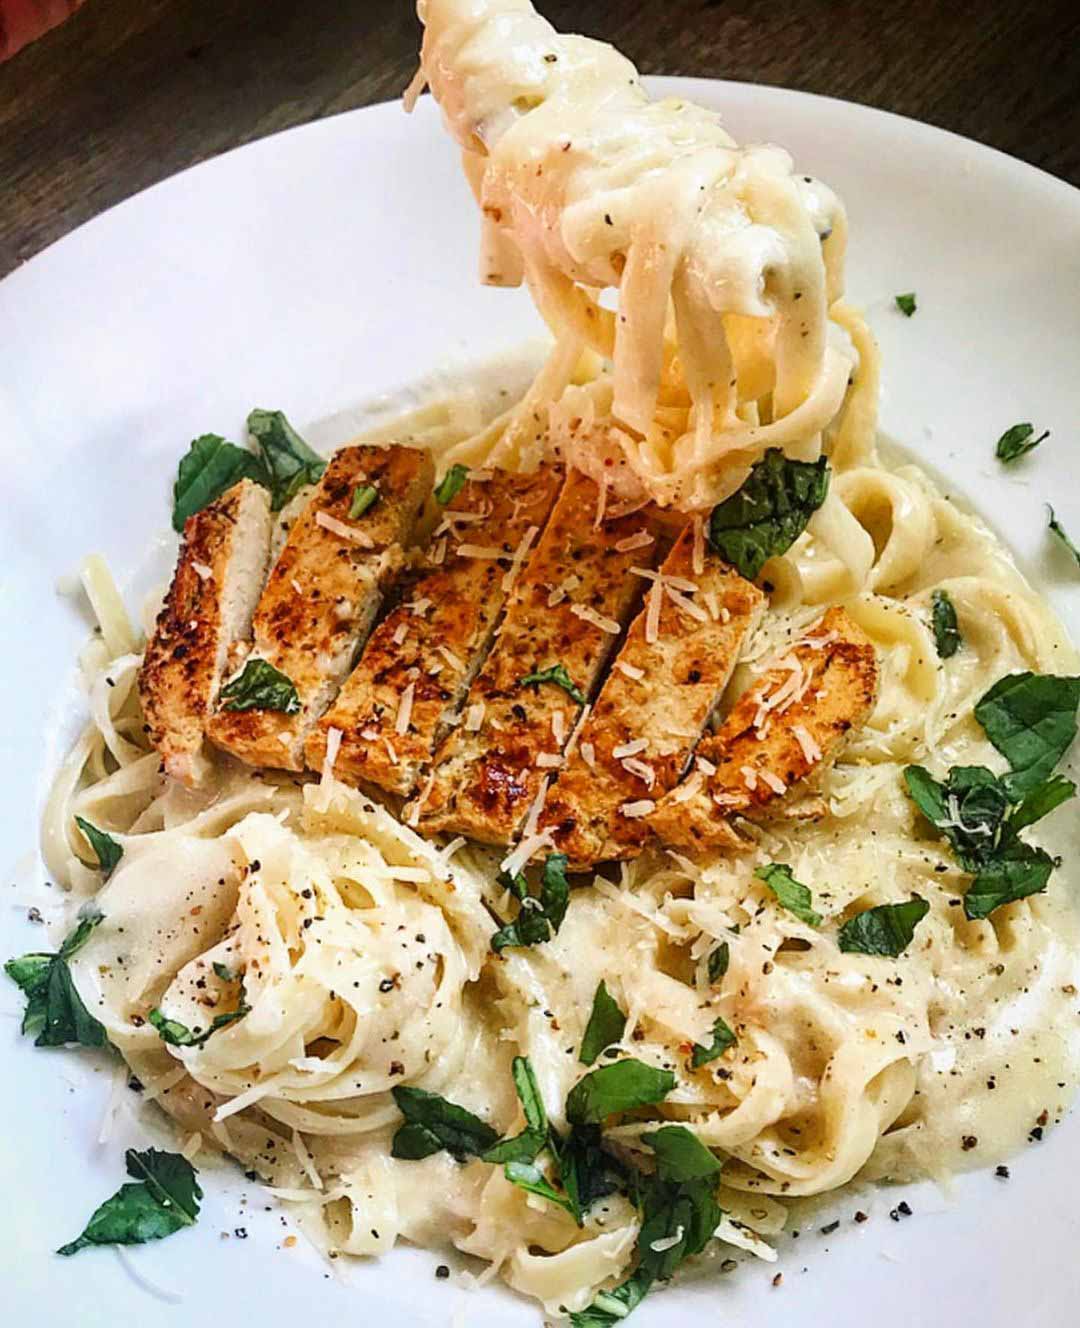 Creamy Chick'n Alfredo Pasta Bowl recipe served on a plate.